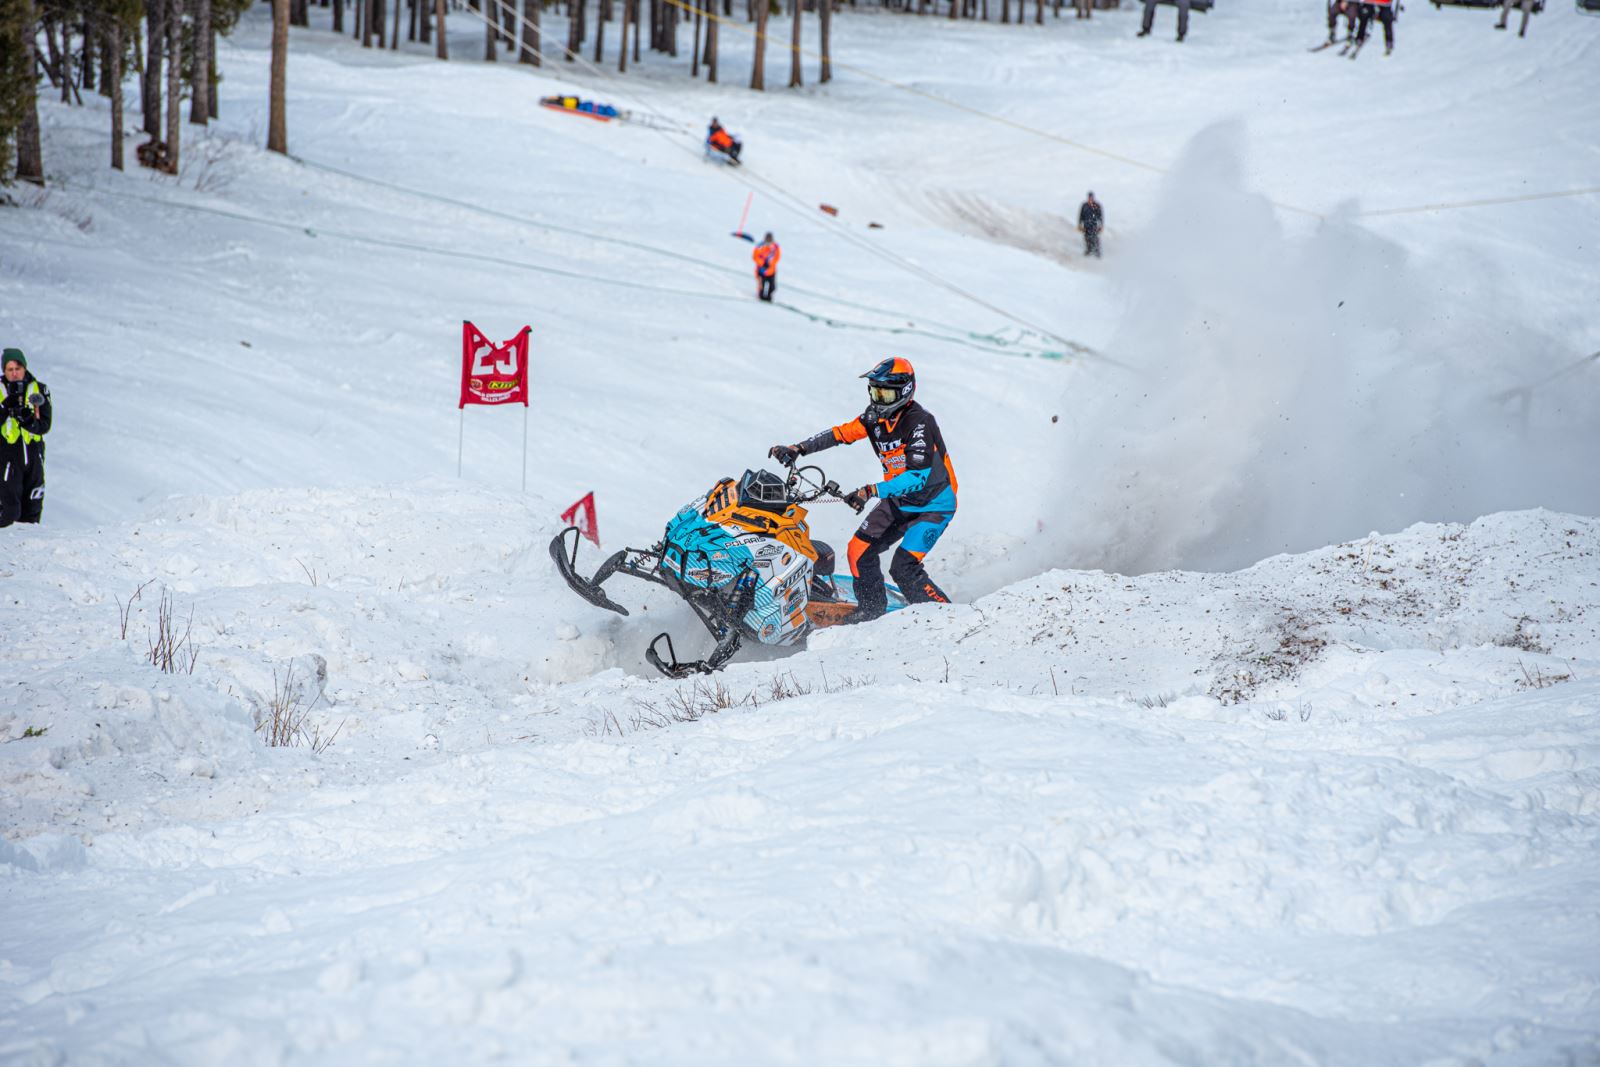 Polaris Snowmobile Hillclimbers Win 11 of 12 Pro Classes and All 4 King